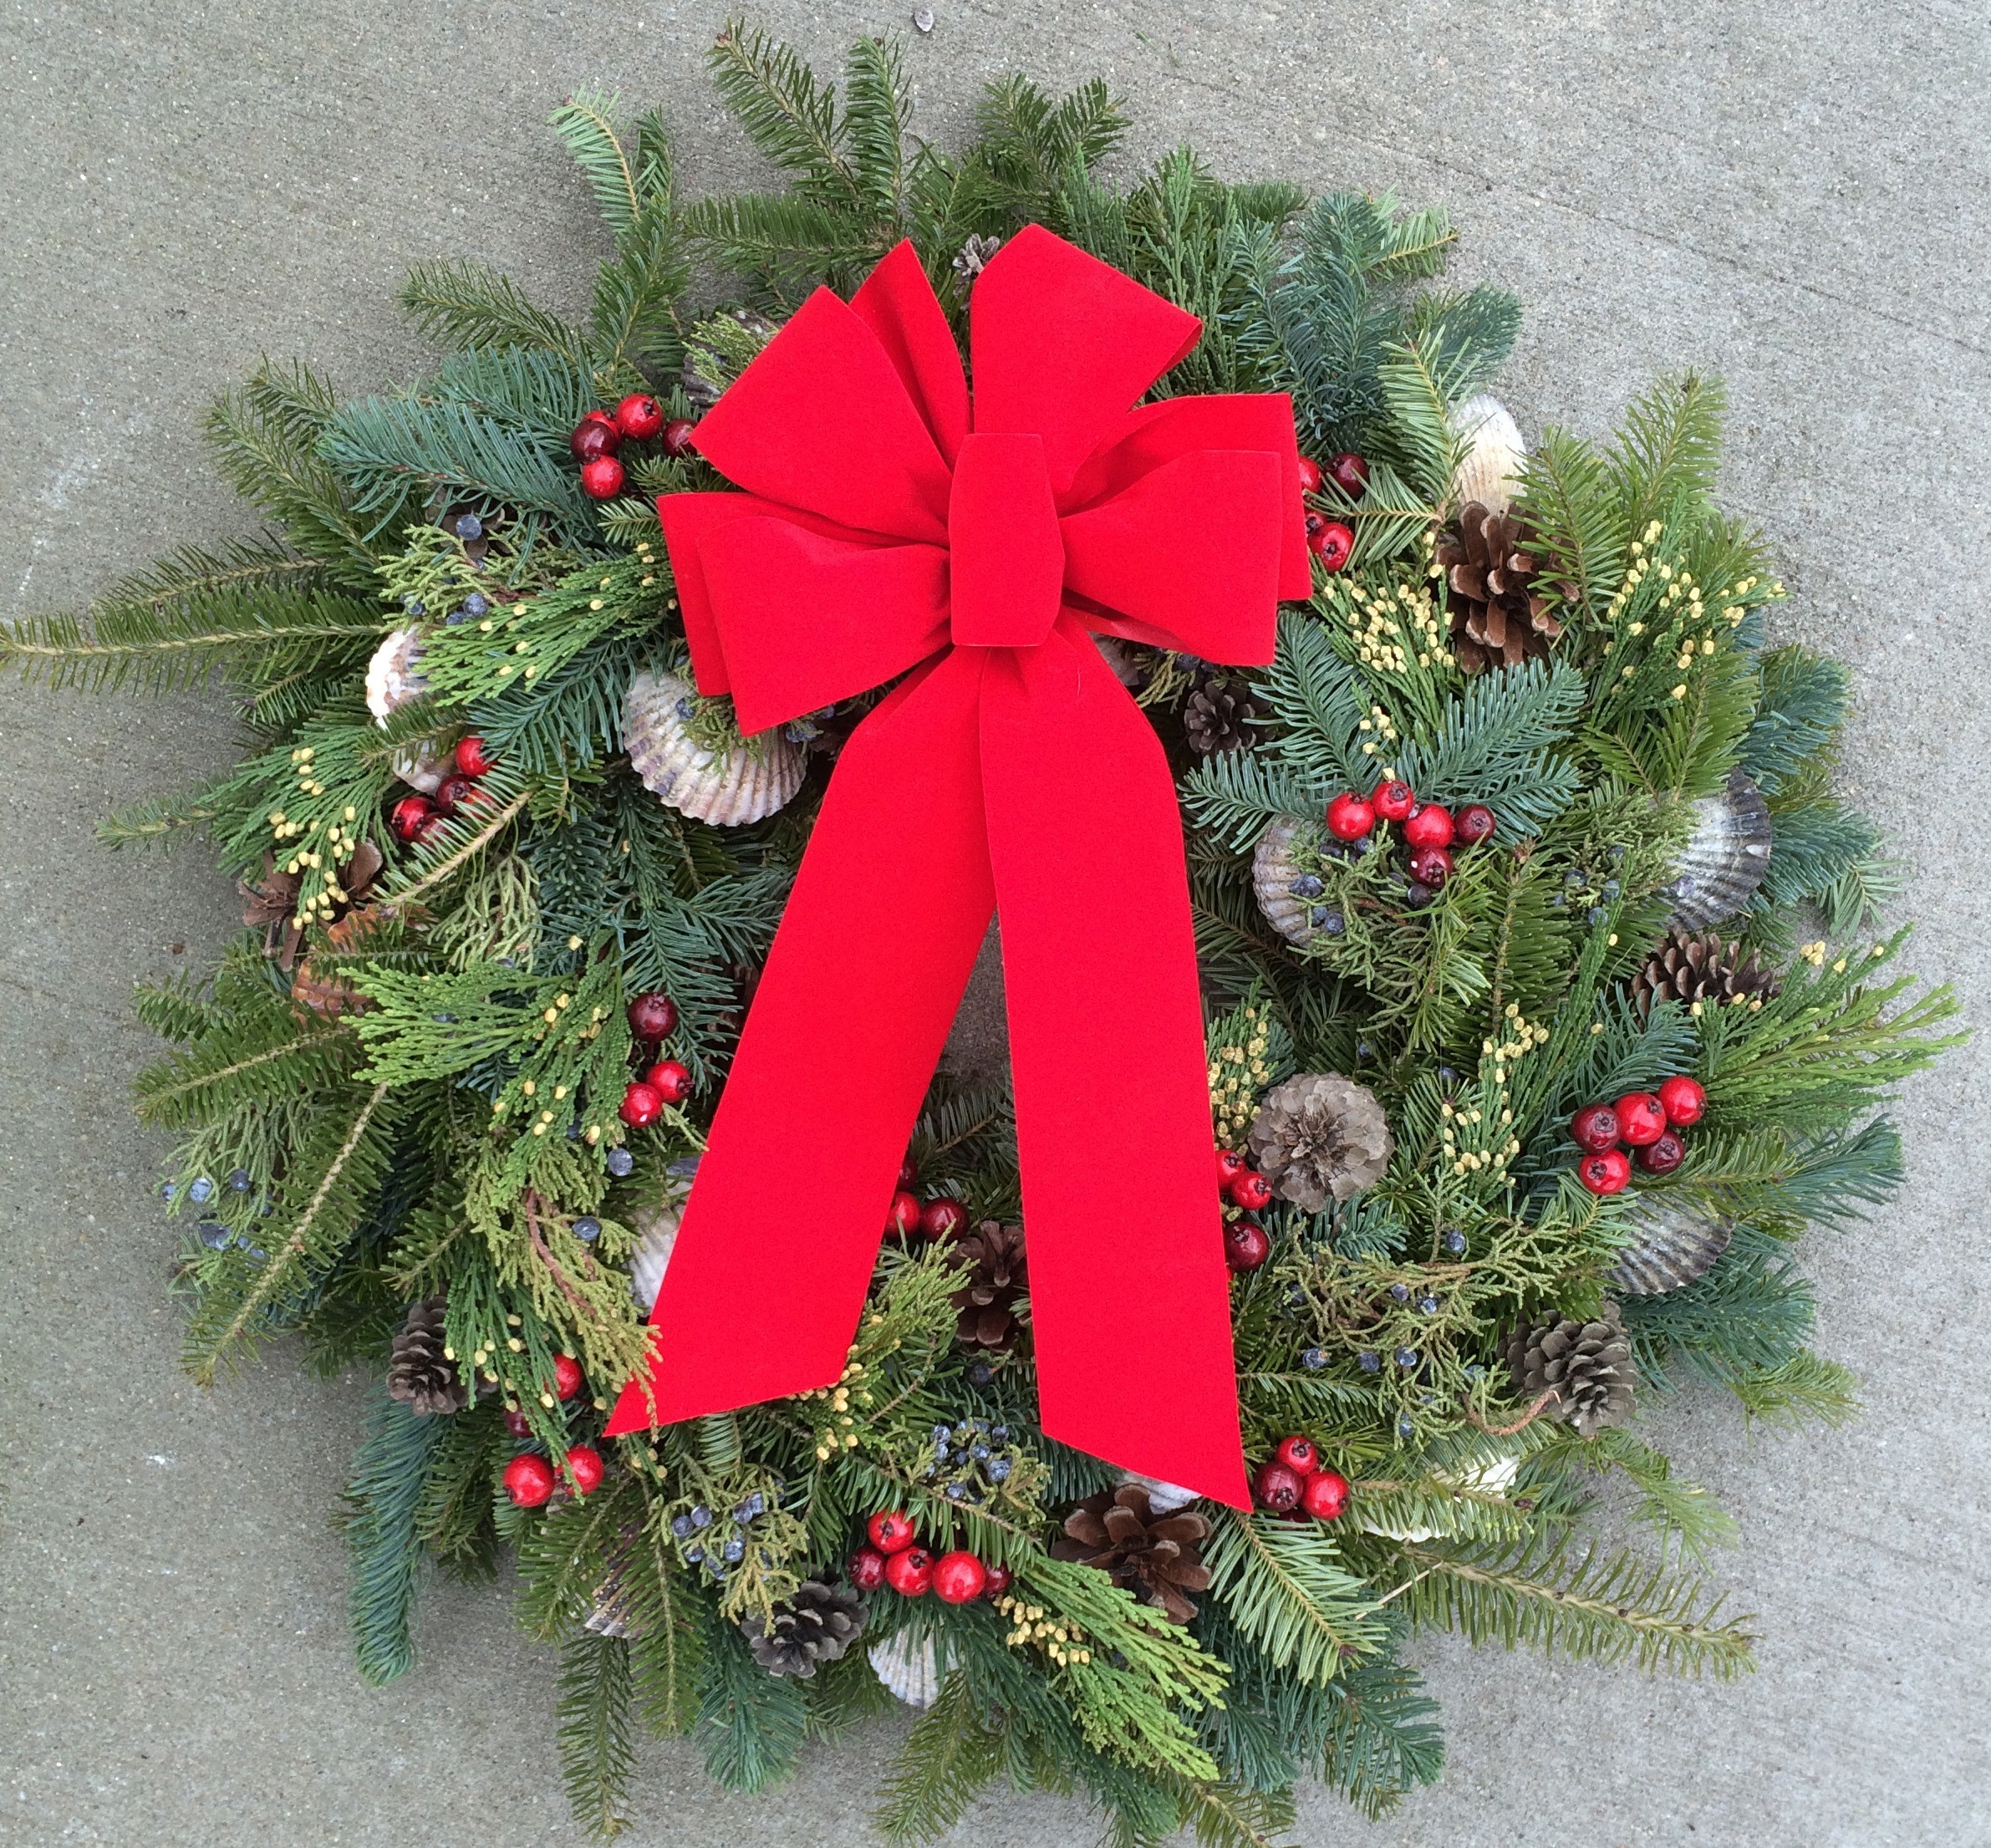 Wreath for 2015